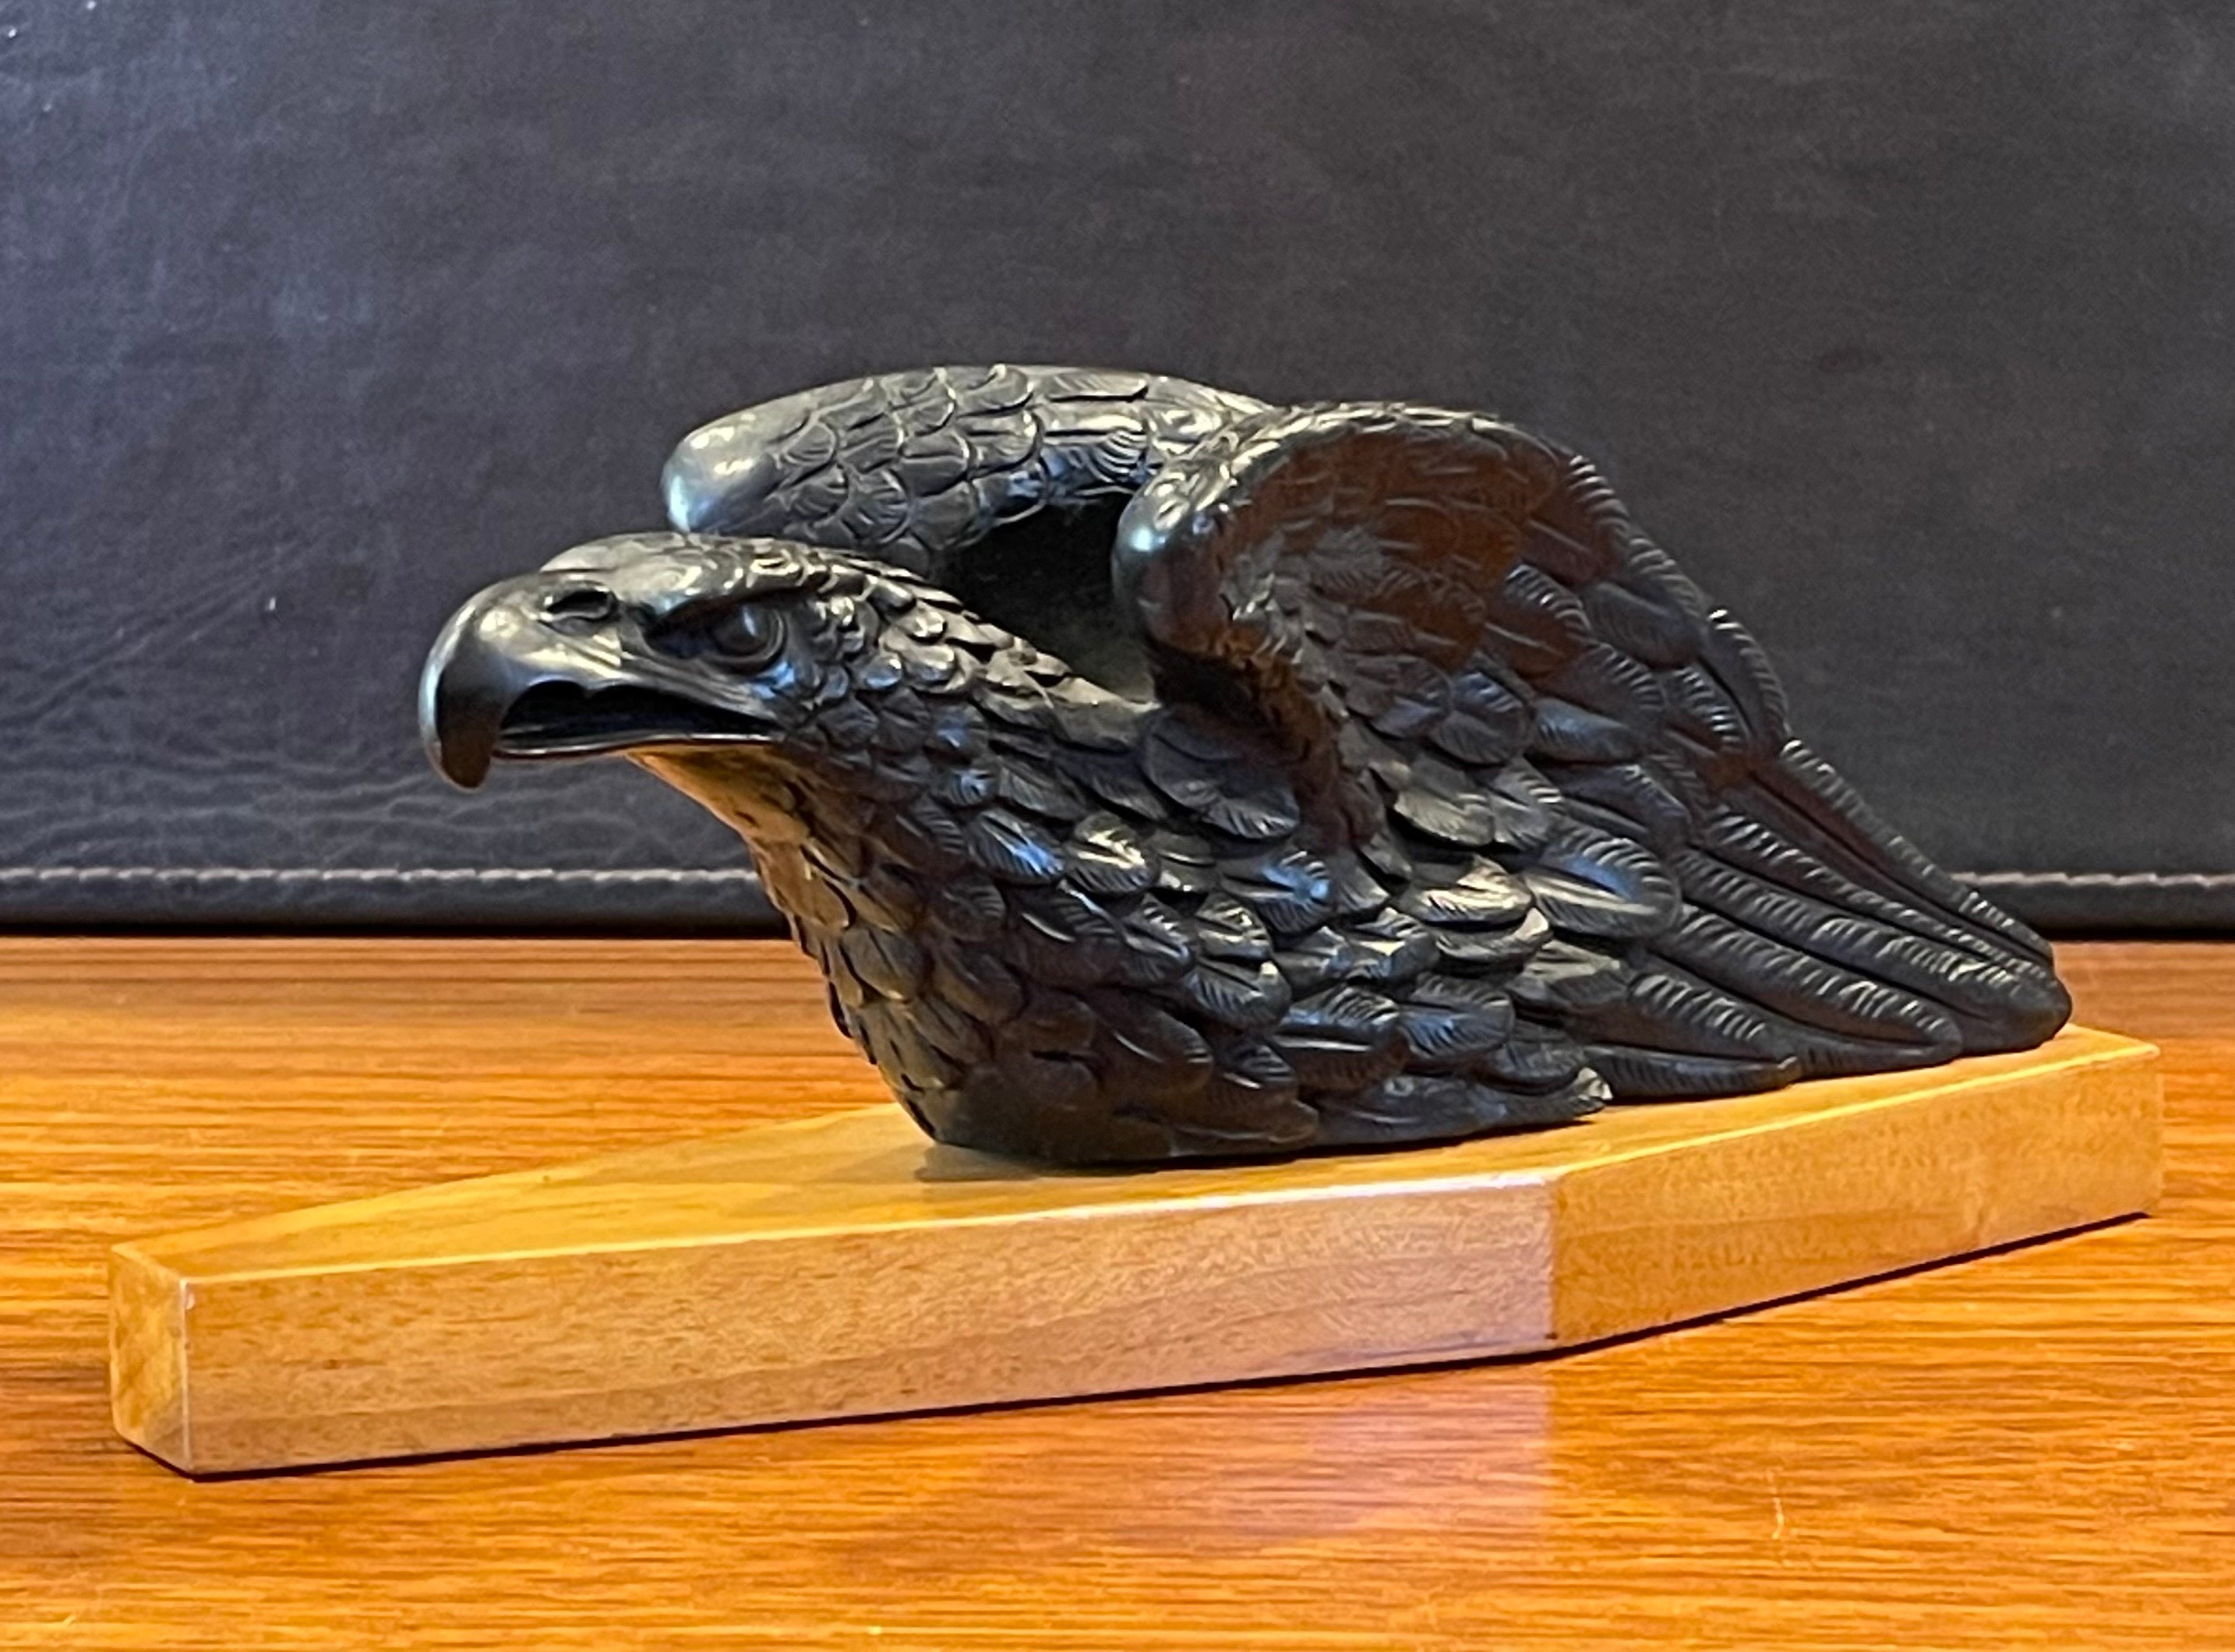 Elegant carved bald eagle on wood base pipe holder / stand / rest by Dunhill, circa 1950s. The eagle has amazing carved detail and I believe is made of wood (if not wood, it is some type of resin or possibly meerschaum - very hard to tell). The